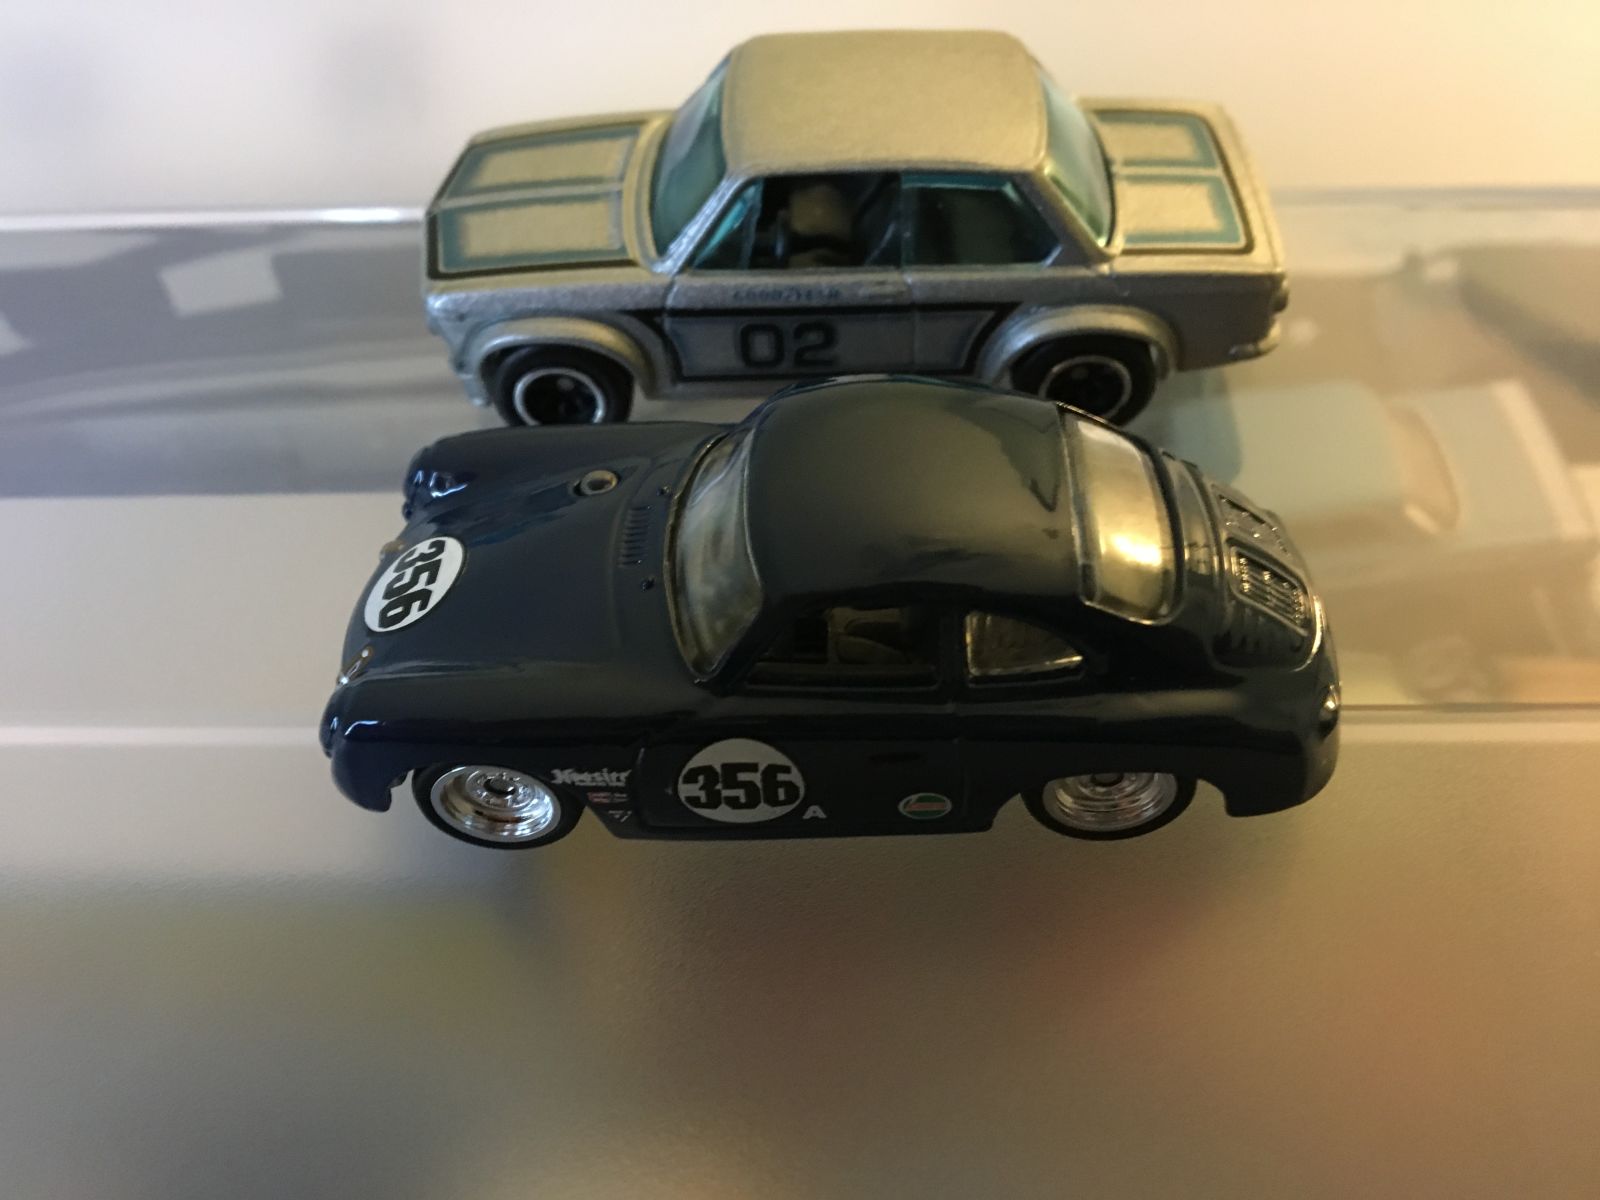 Illustration for article titled Hot Wheels Air-Cooled Porsche 356A Outlaw.